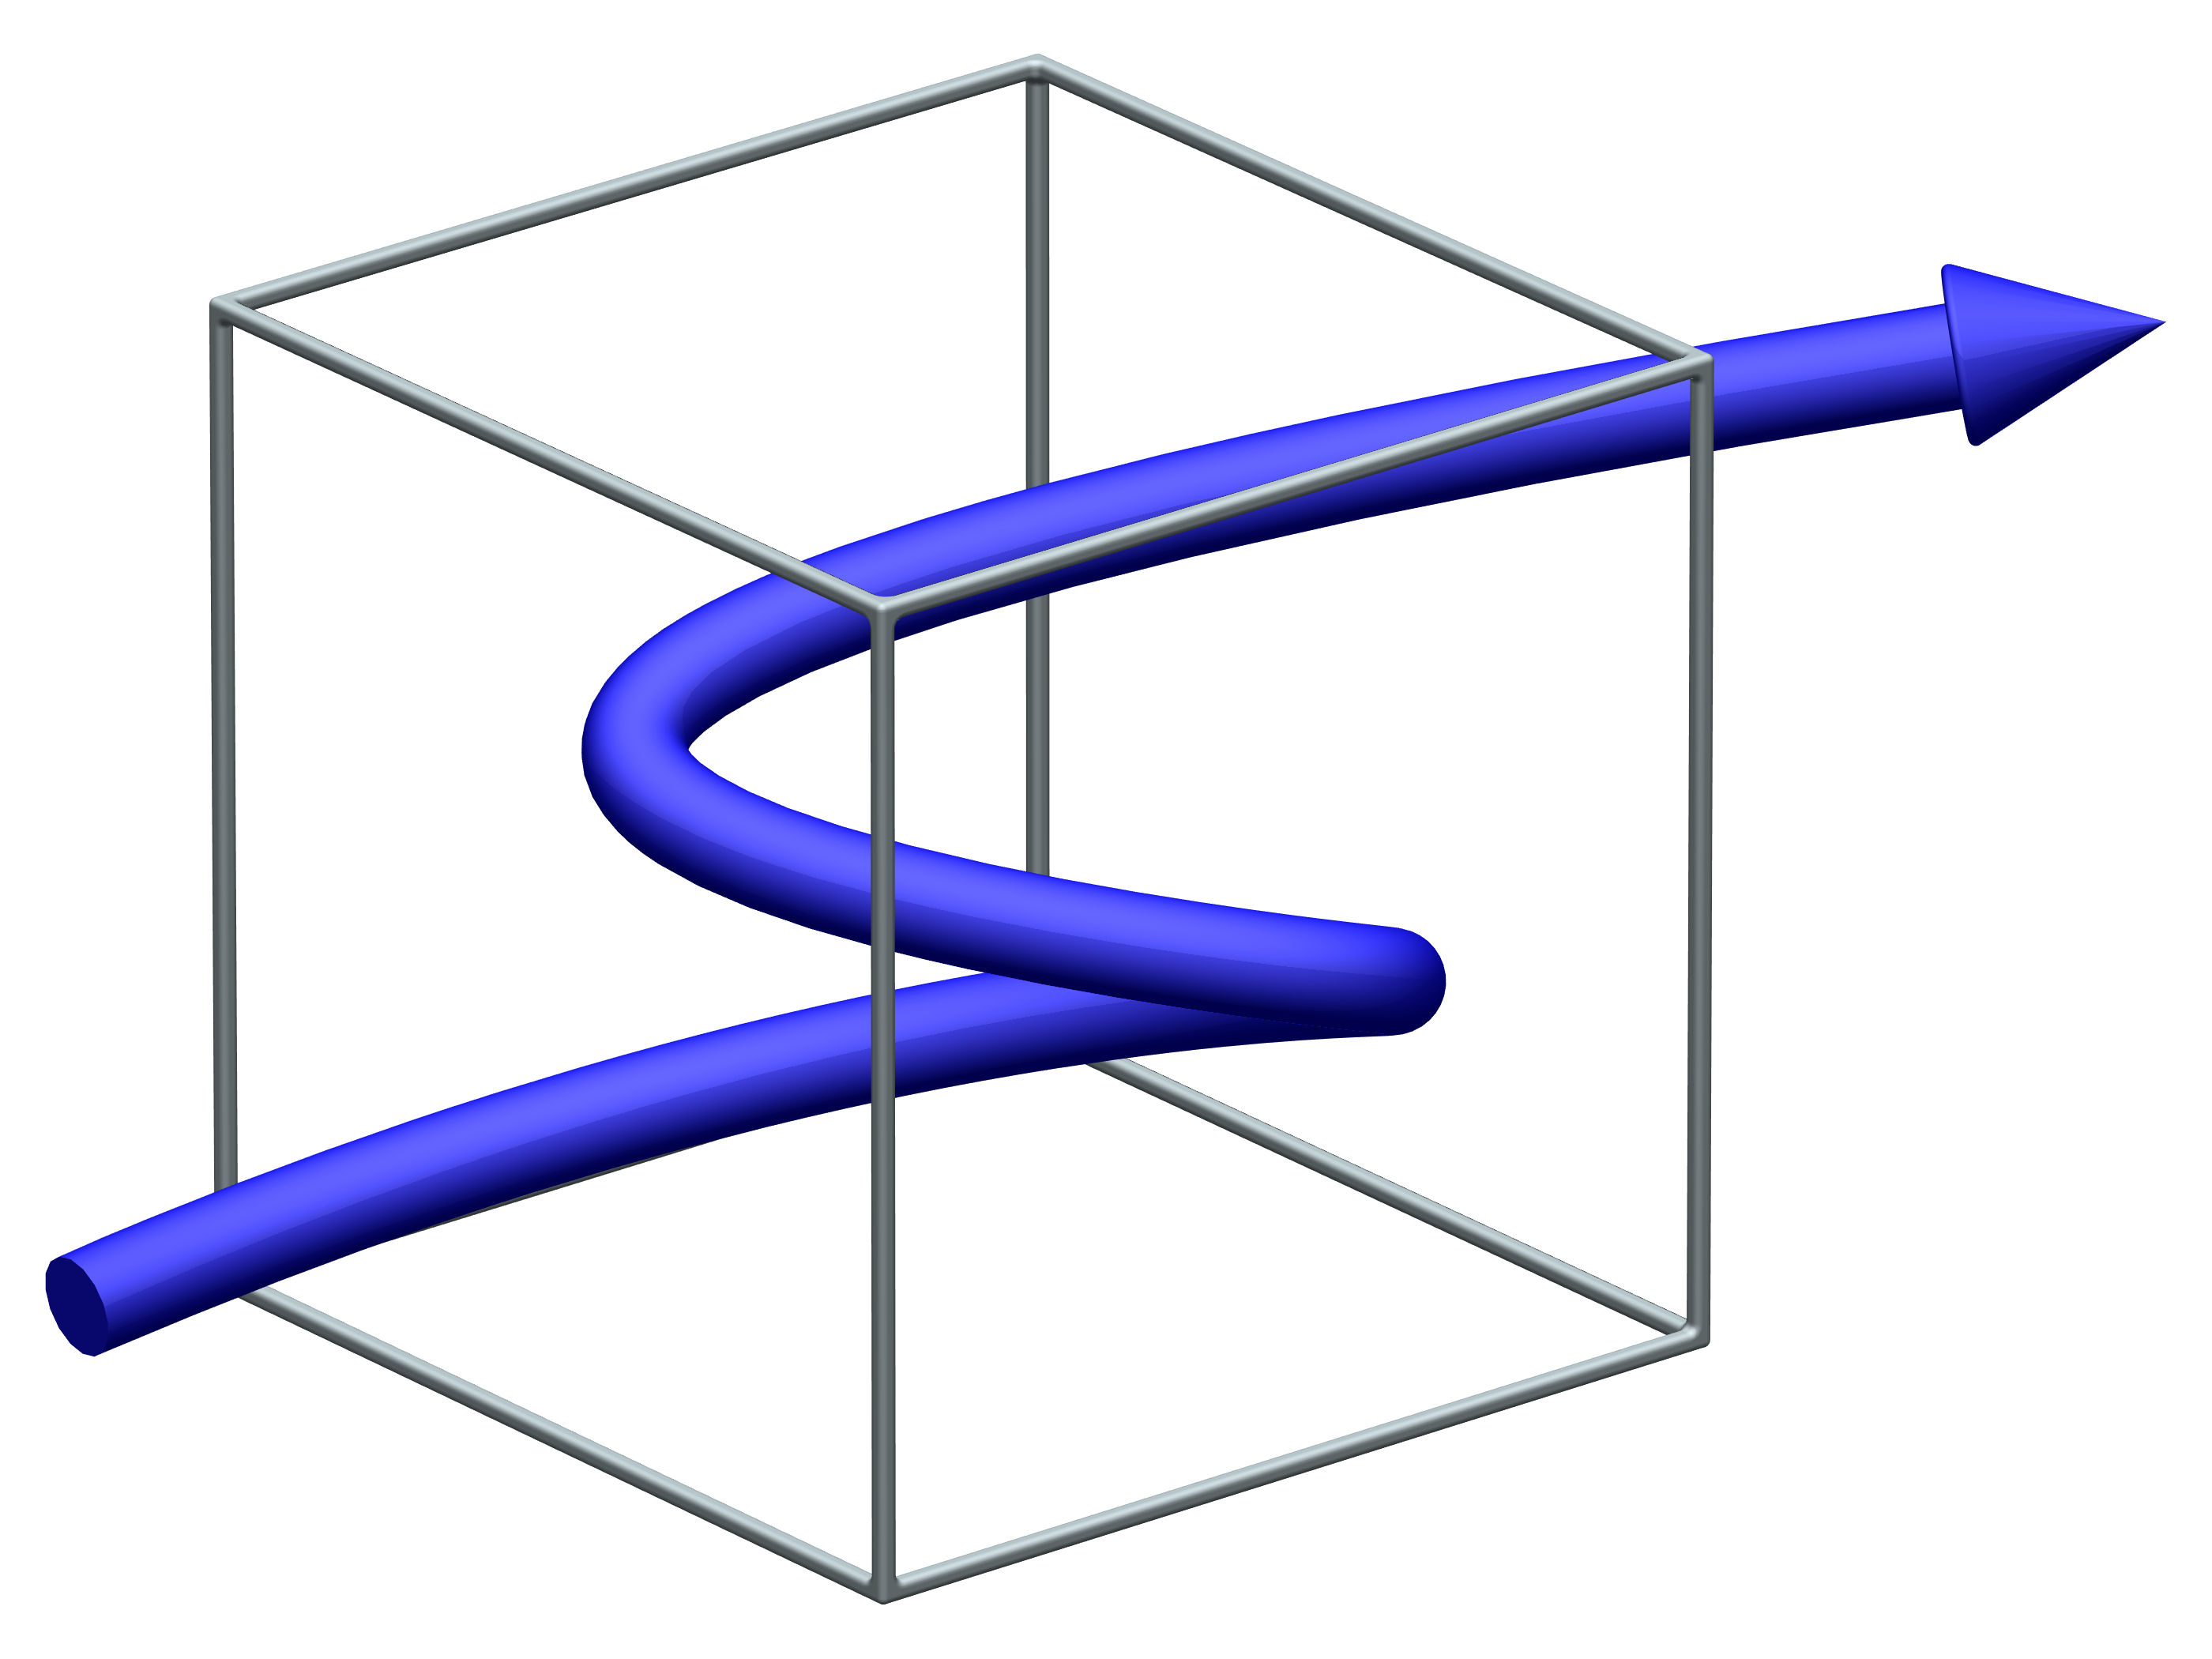 The OJET Logo, symbolizing a trajectory in 3-dimensional space.